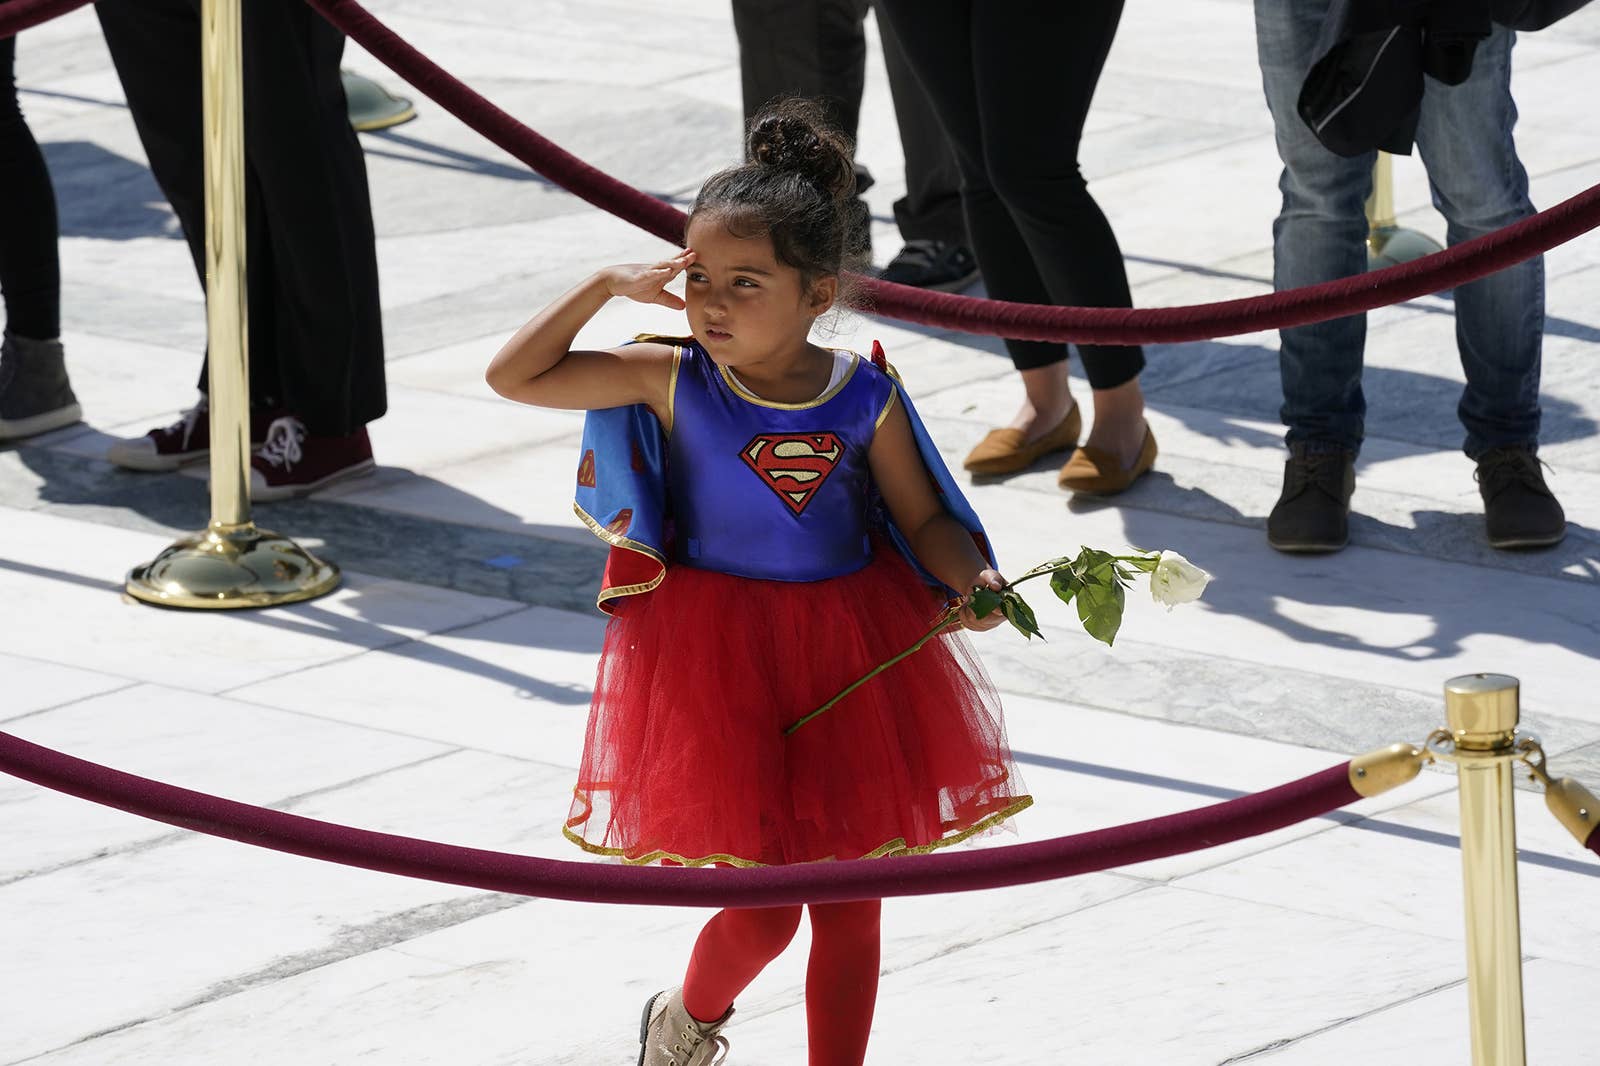 A girl dressed in a Supergirl costume pays her respects at the casket